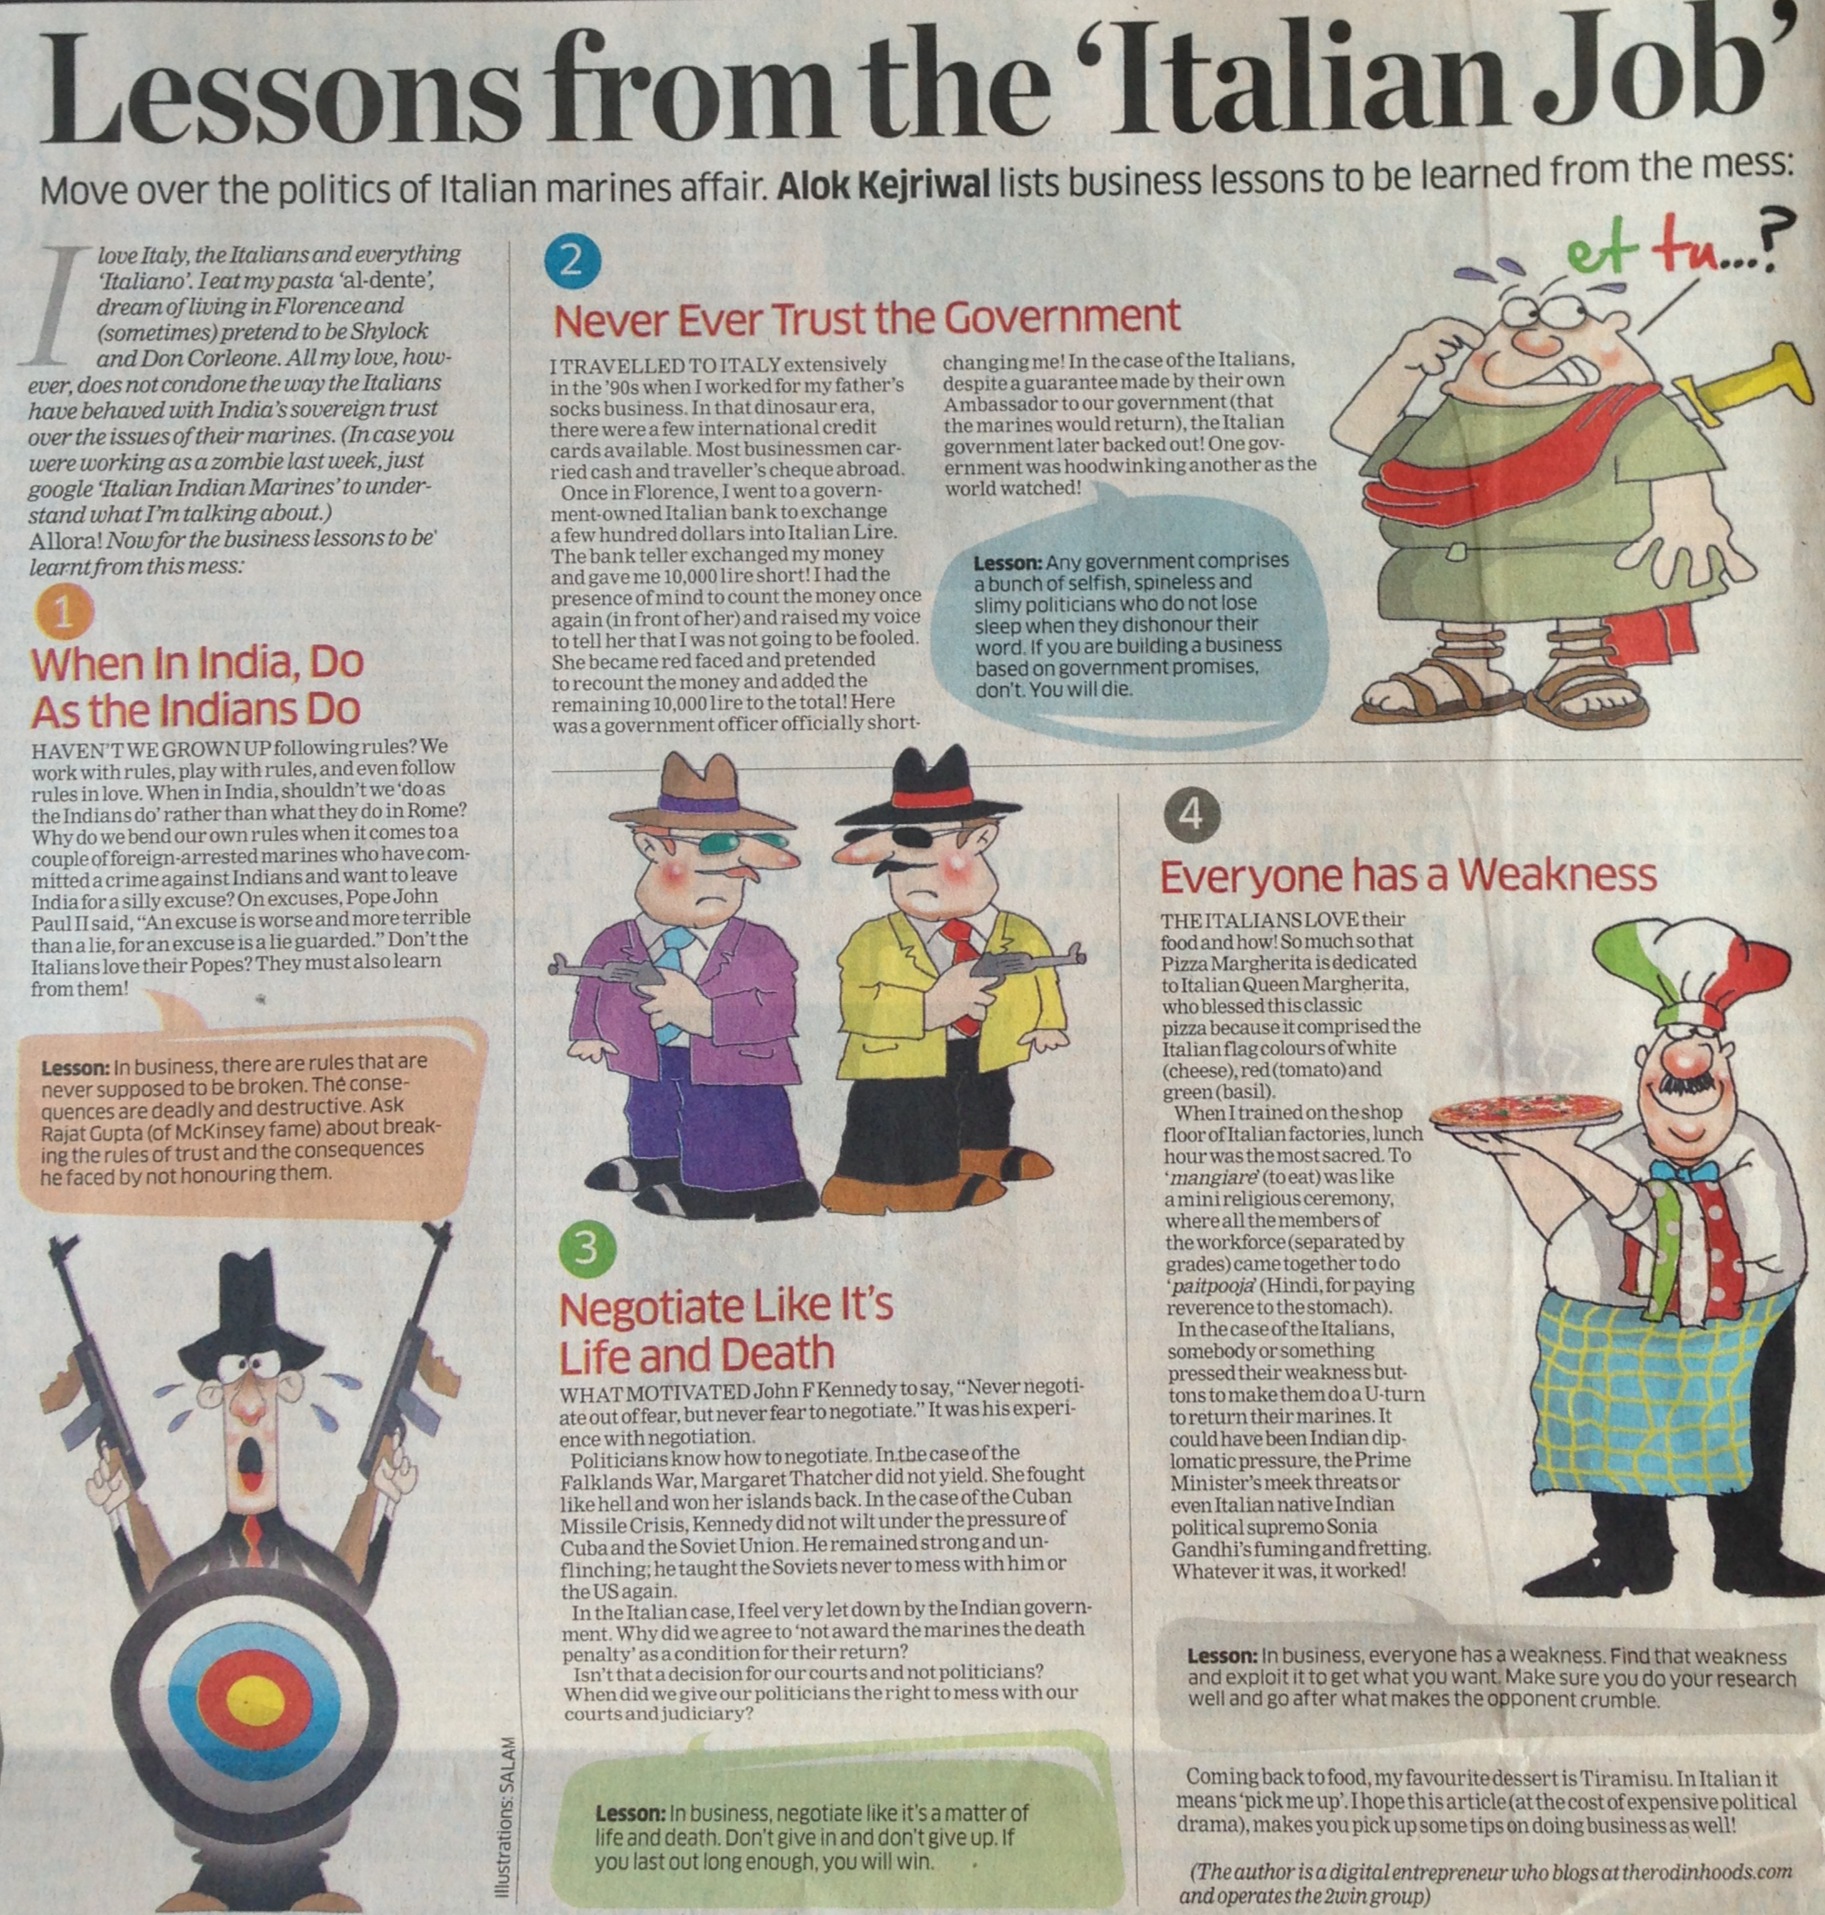 Out & About in Italy, Article